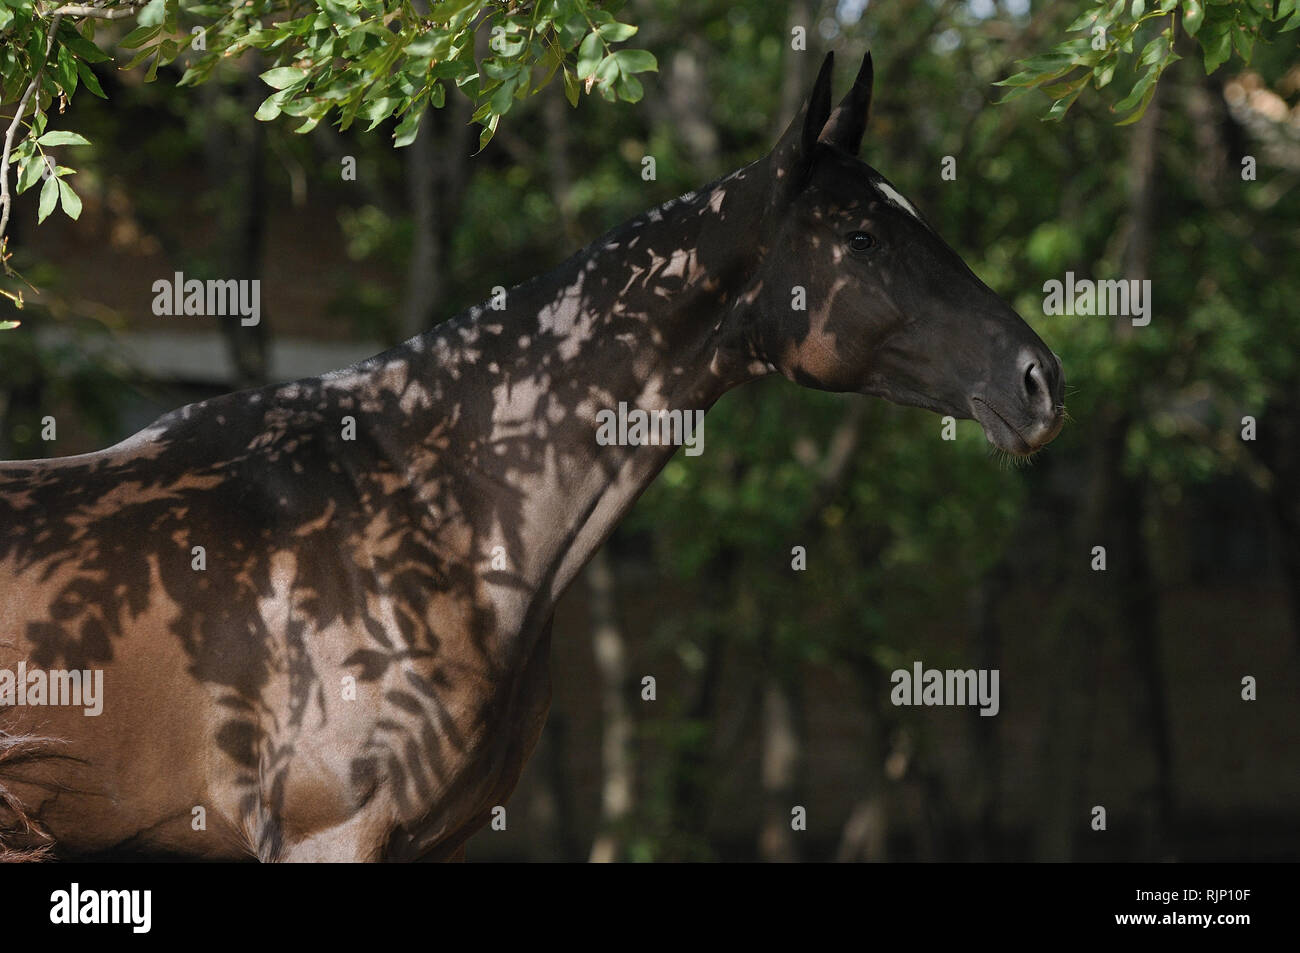 Black mare stands in the shadows of leaves in the summer hiding from insects. Horizontal,portrait,side view. Stock Photo